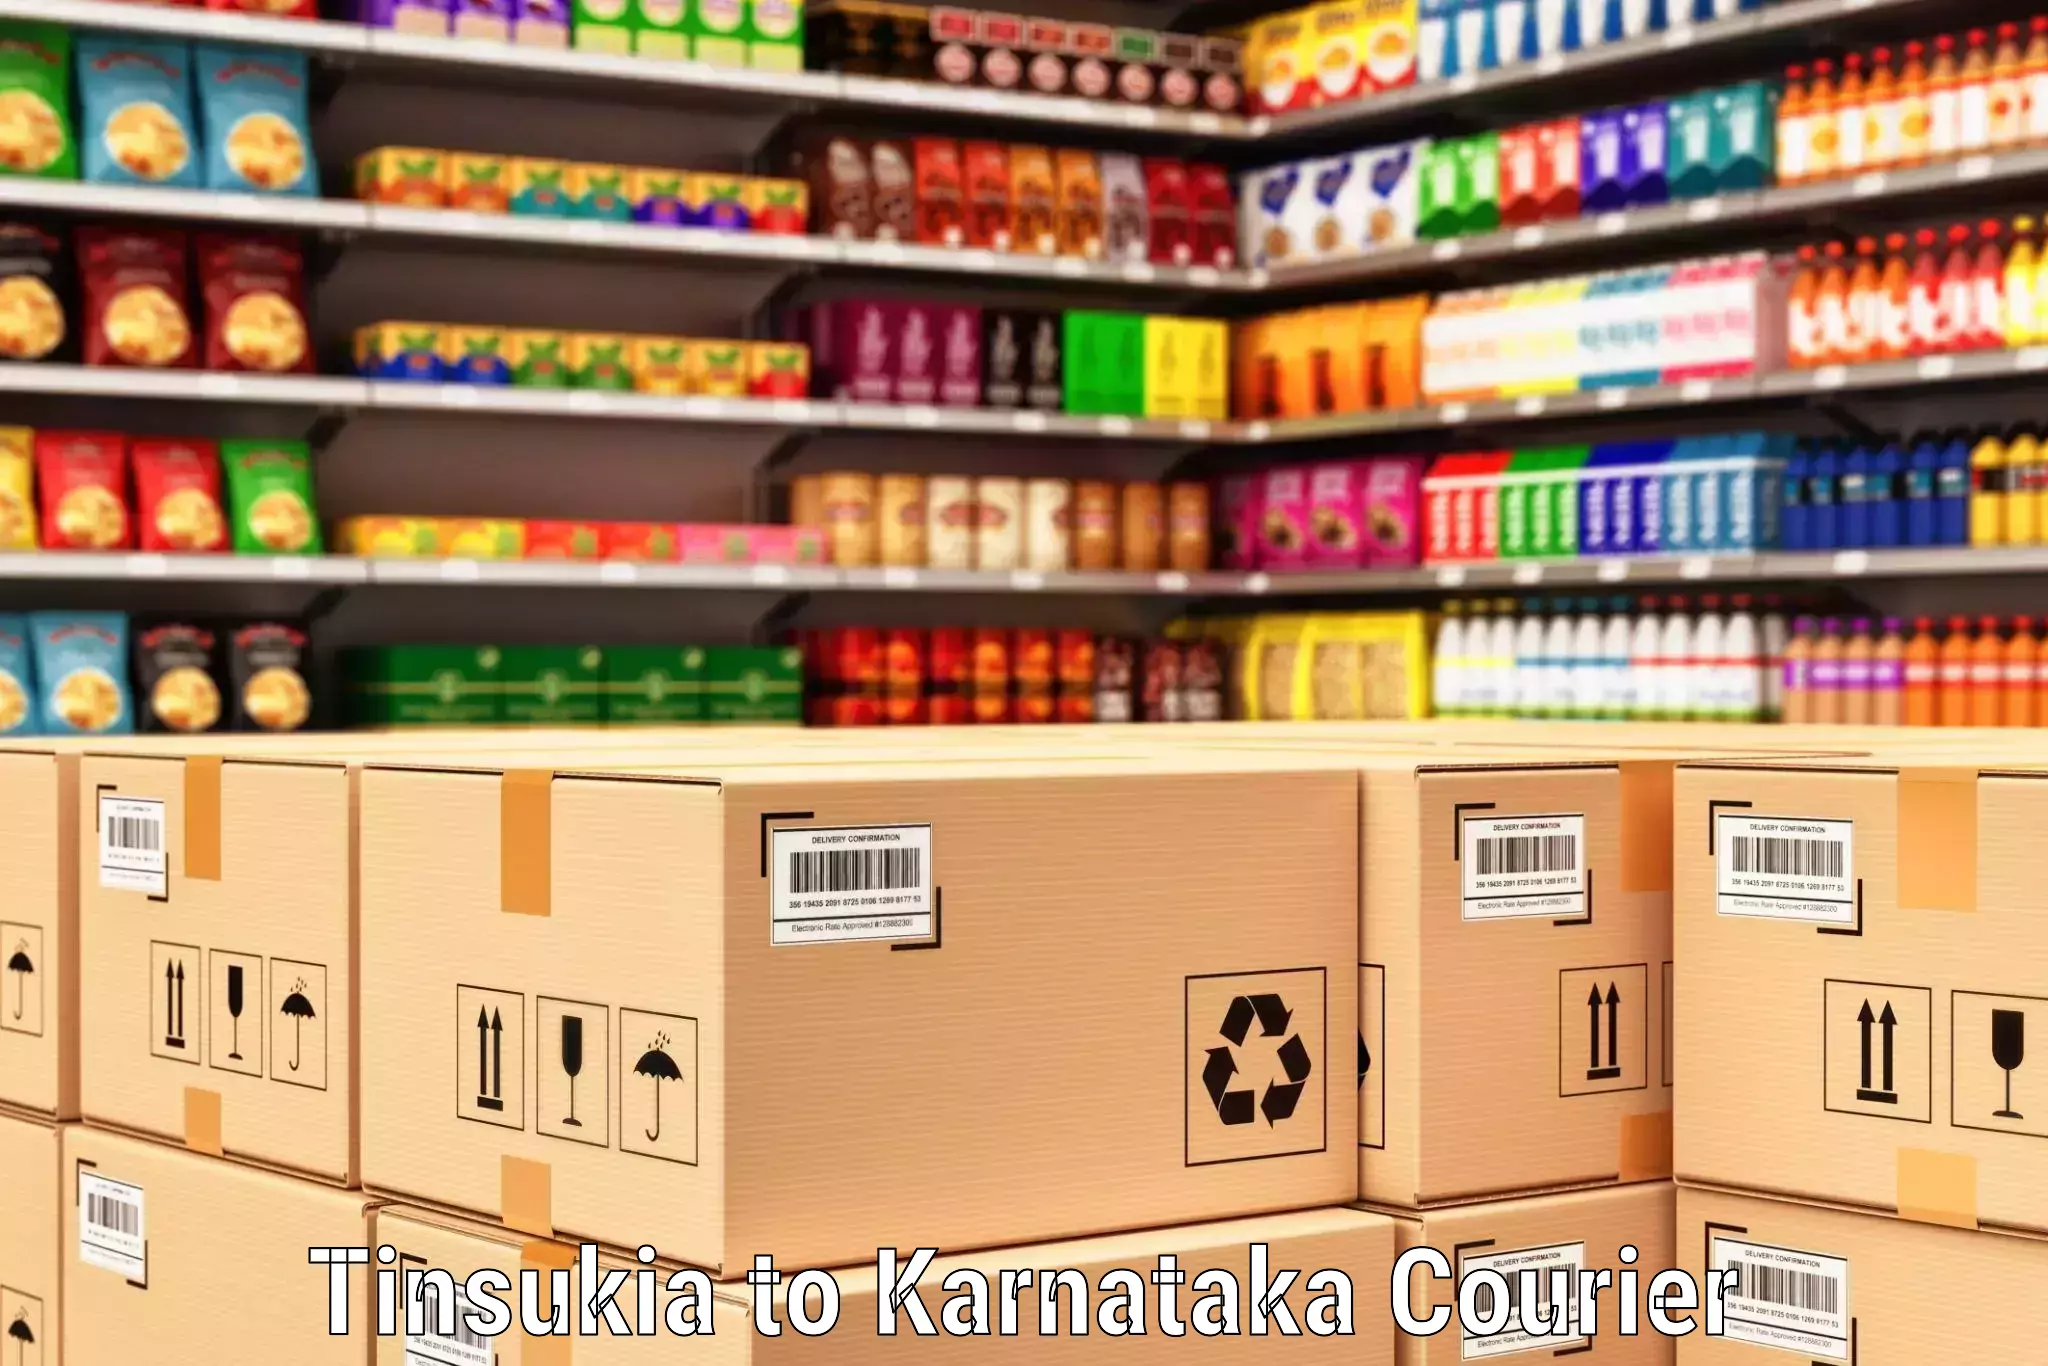 Return courier service in Tinsukia to Mangalore Port